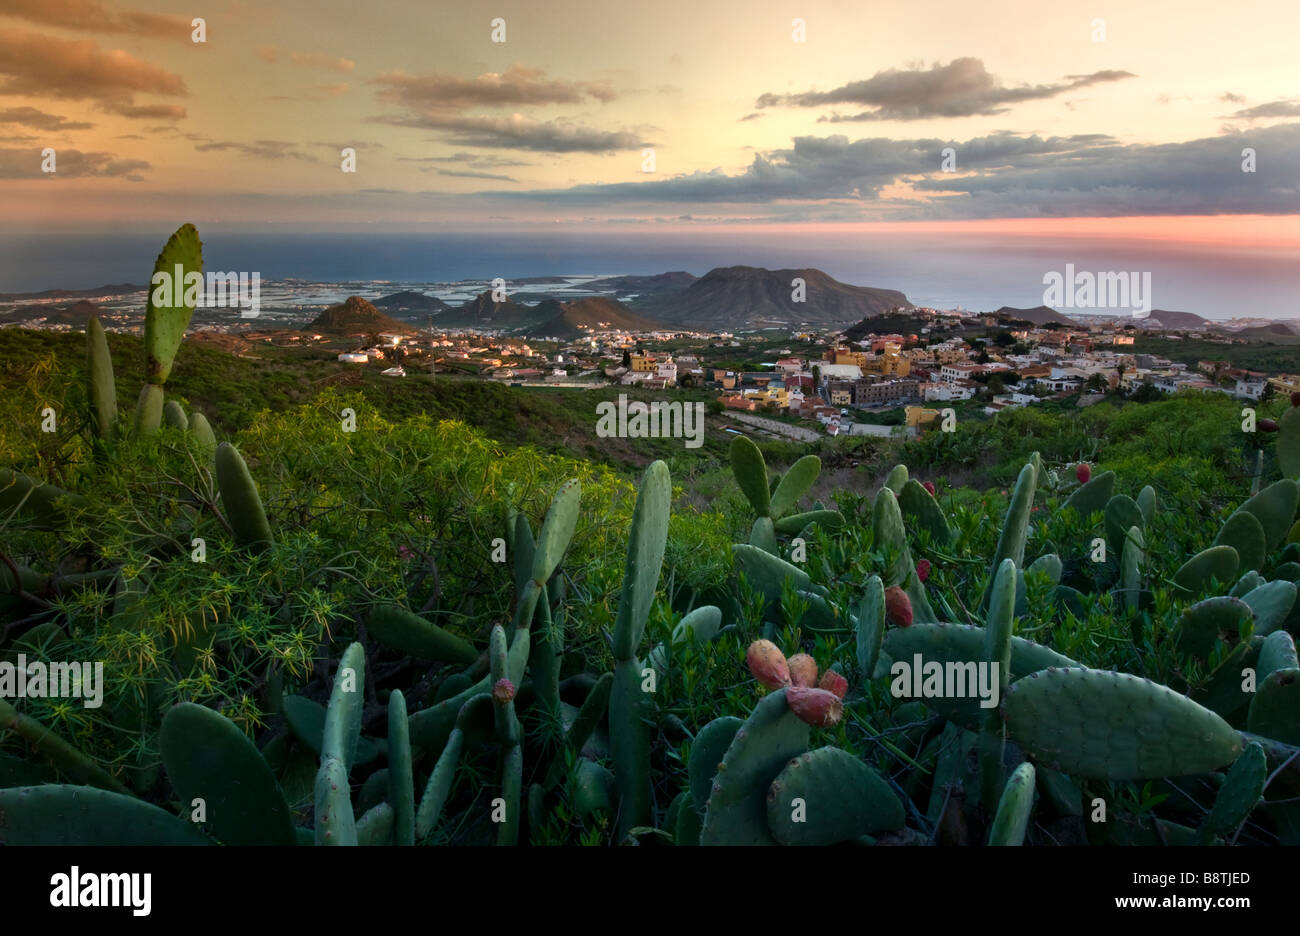 Sunset over the mountain village of Arona with typical cacti in foreground and resort of Los Cristianos behind, Tenerife Spain Stock Photo